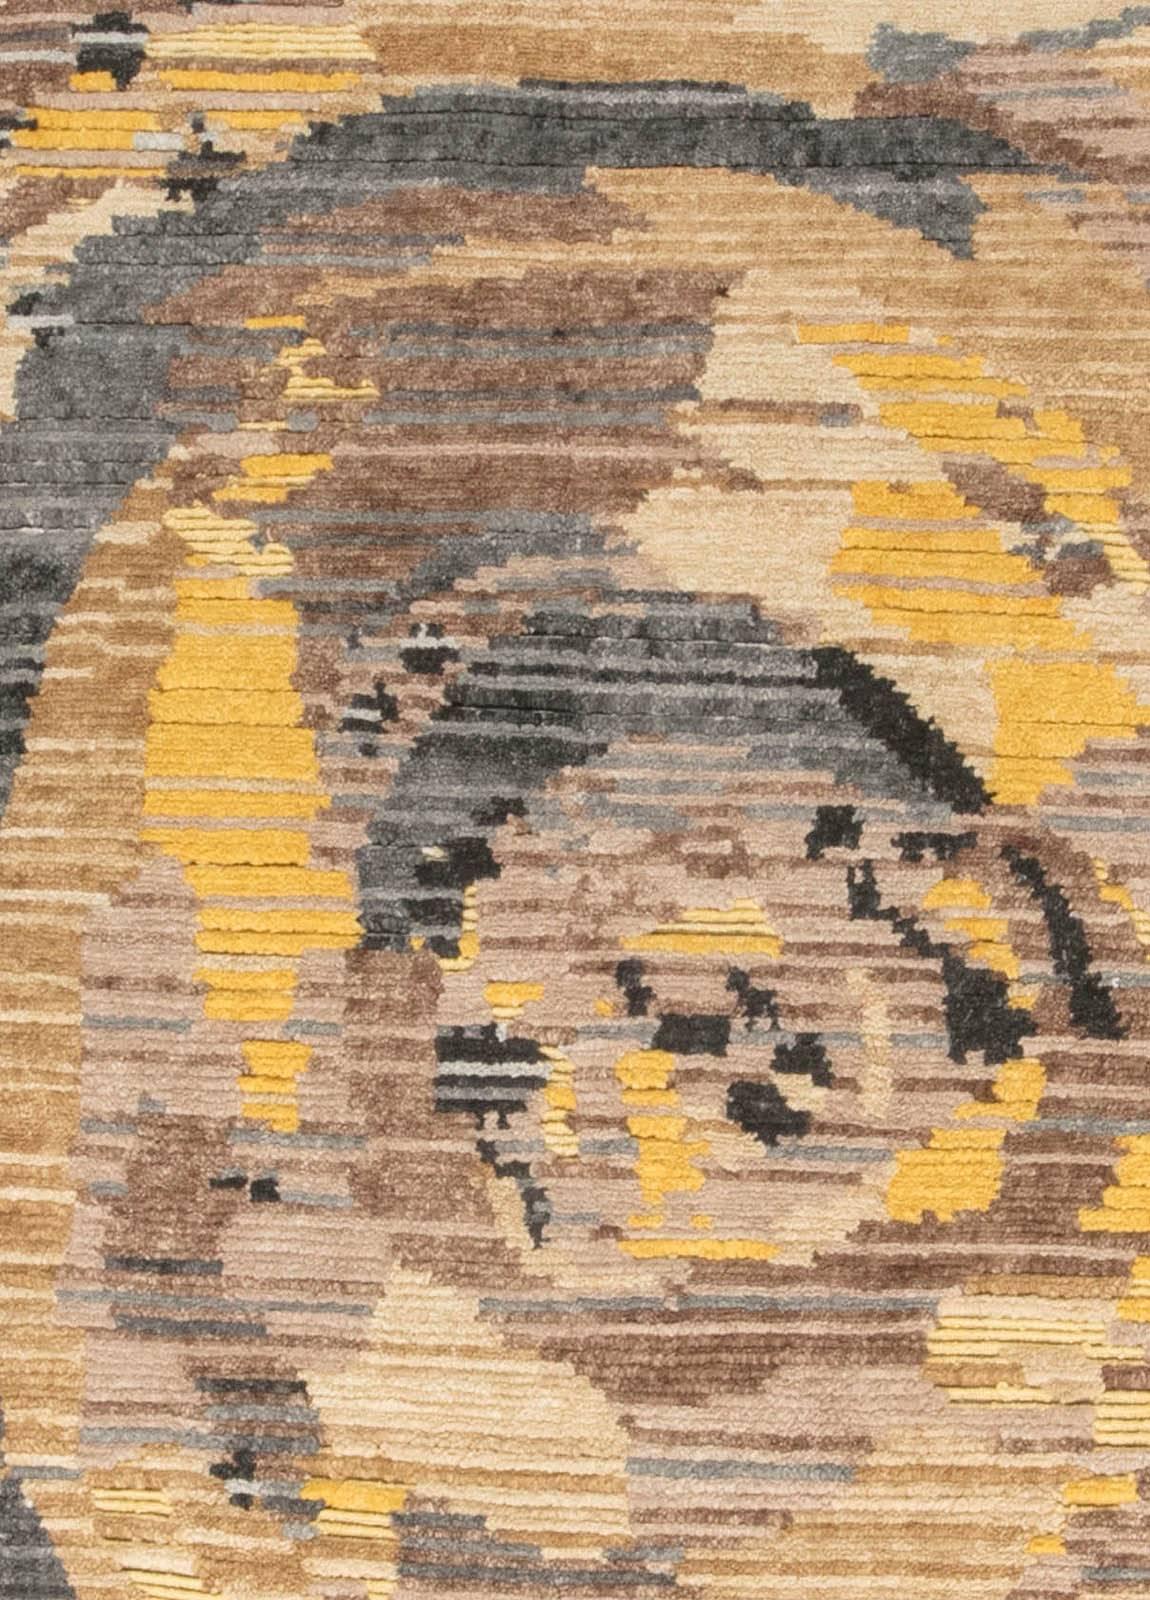 Just one look at this mesmerizing contemporary rugs is enough to completely charm one's heart. Made with great care and best available materials, the carpet boasts a truly hypnotic pattern, bound to make any type of interior special. Strange shapes